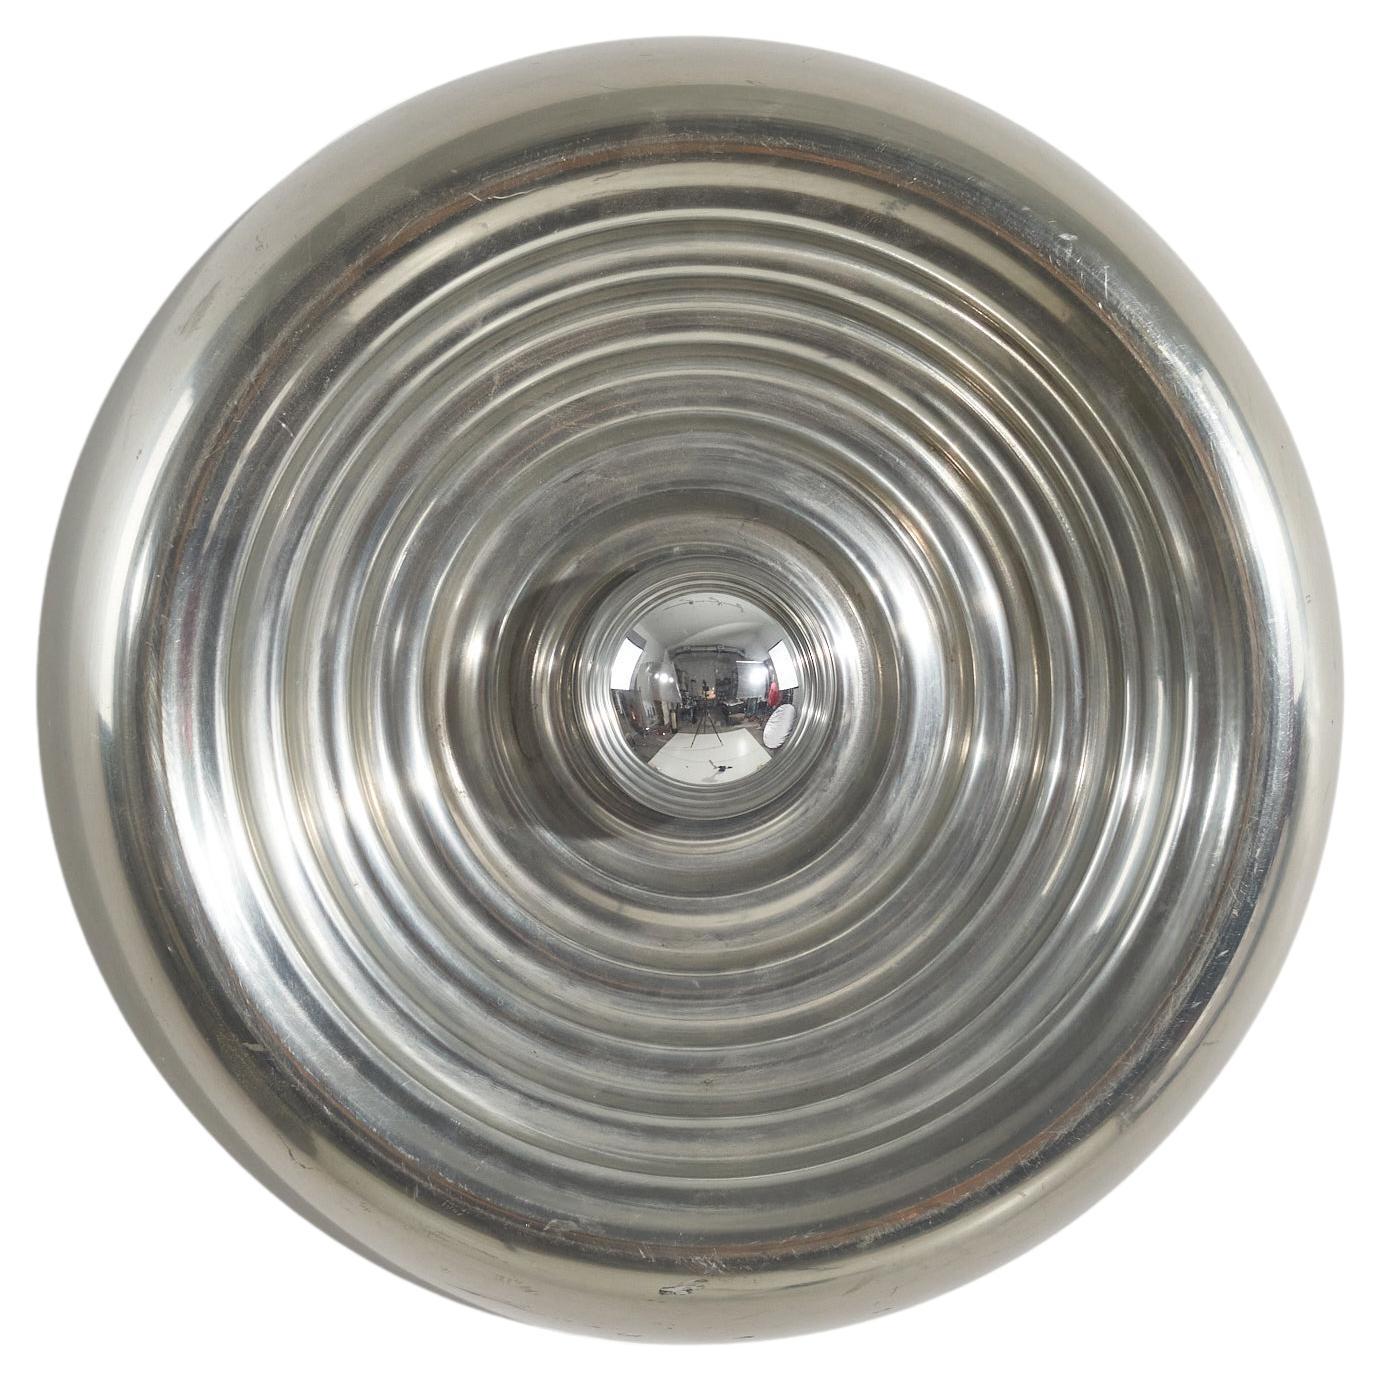 An aluminum wall light or flush mount designed by Achille Castiglioni and produced by Flos, Italy, 1970s.

Dimensions of back plate (inches) : (5.75 x 5.75 x .18).